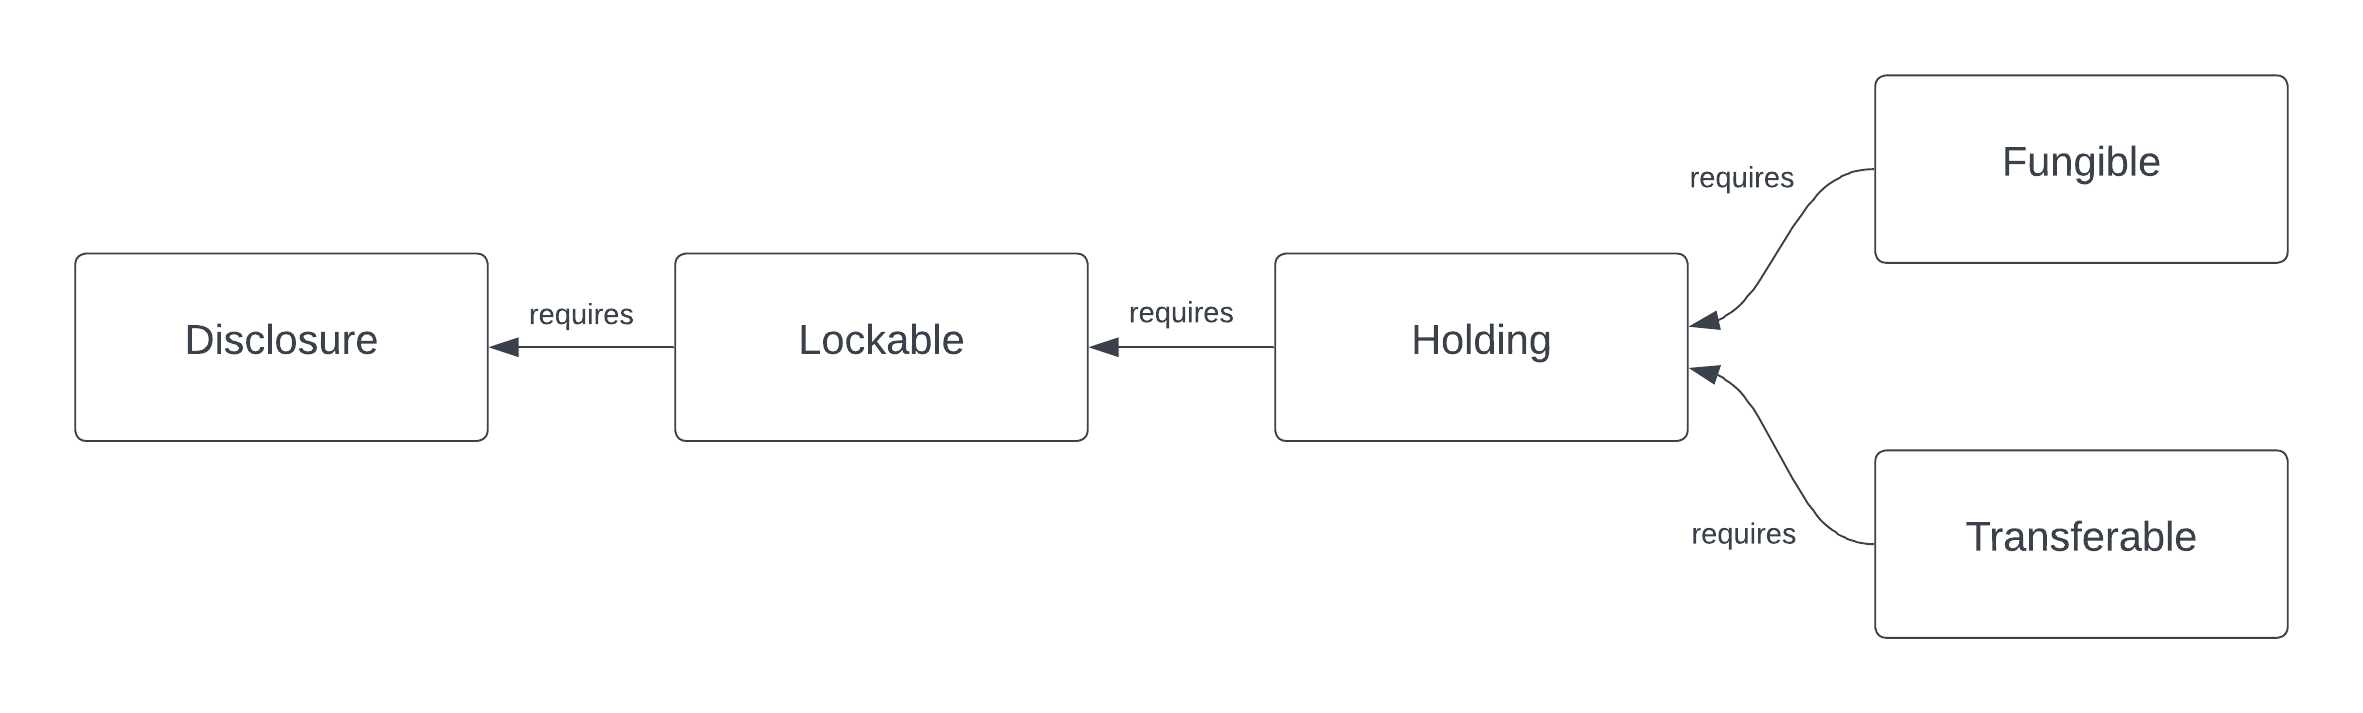 A diagram of the interface hierarchy. From left to right, Disclosure, Lockable, Holding, and Transferable are each linked by arrows pointing left. Additionally, Fungible is located above from Transferable, and has an arrow pointing to Holding. All arrows are labeled "requires".